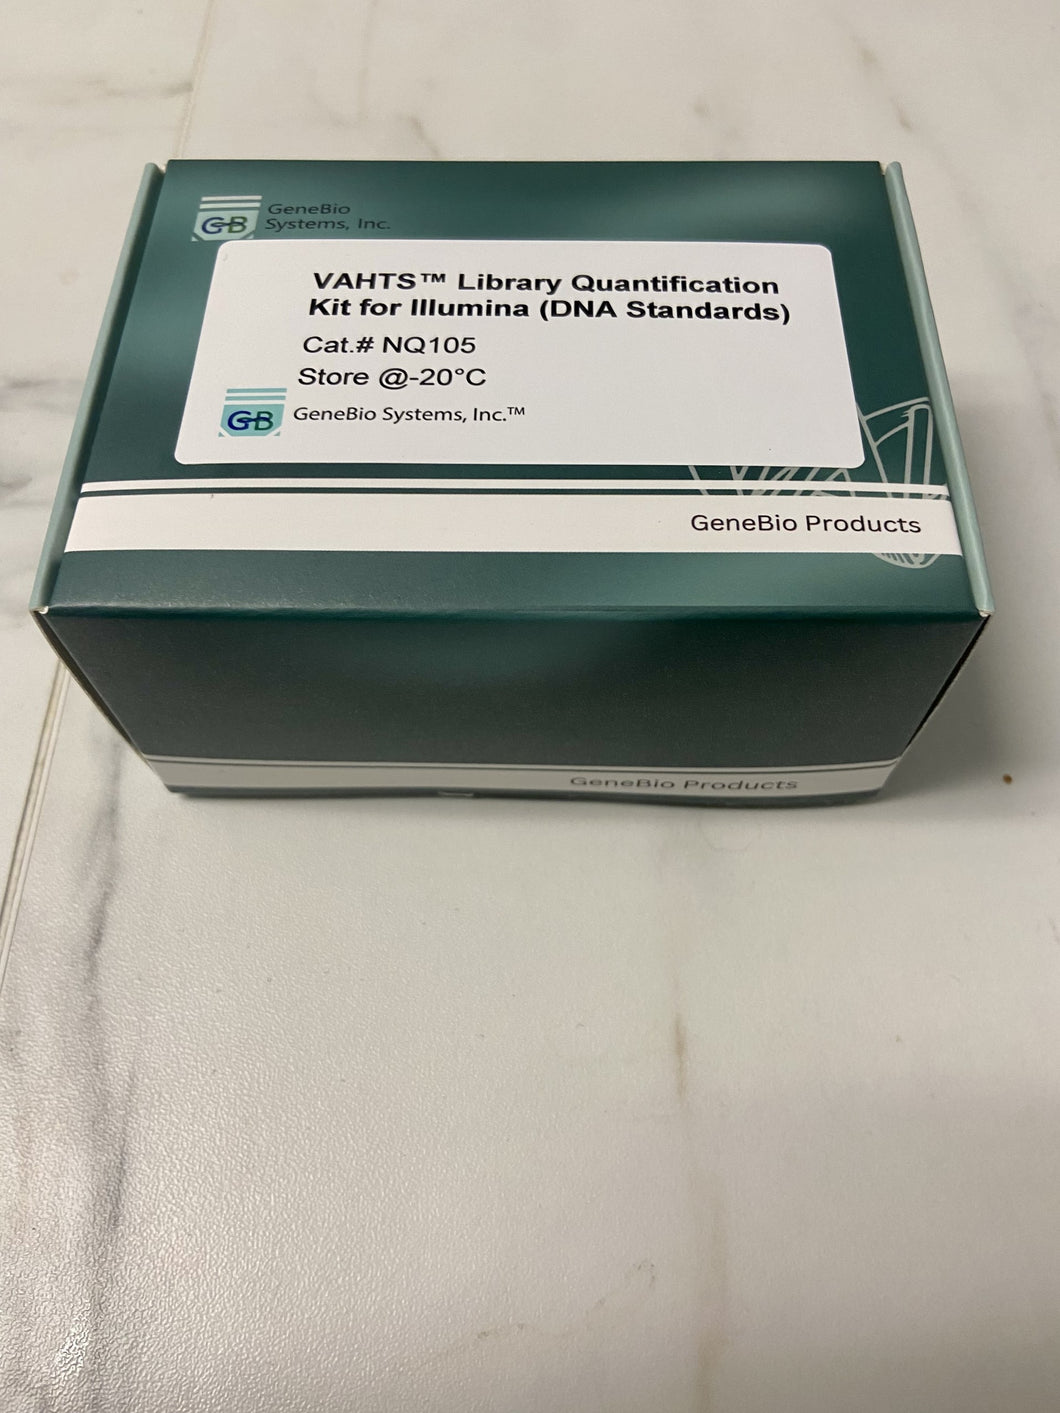 VAHTS Library Quantification Kit for IIIumina  (DNA Standards)